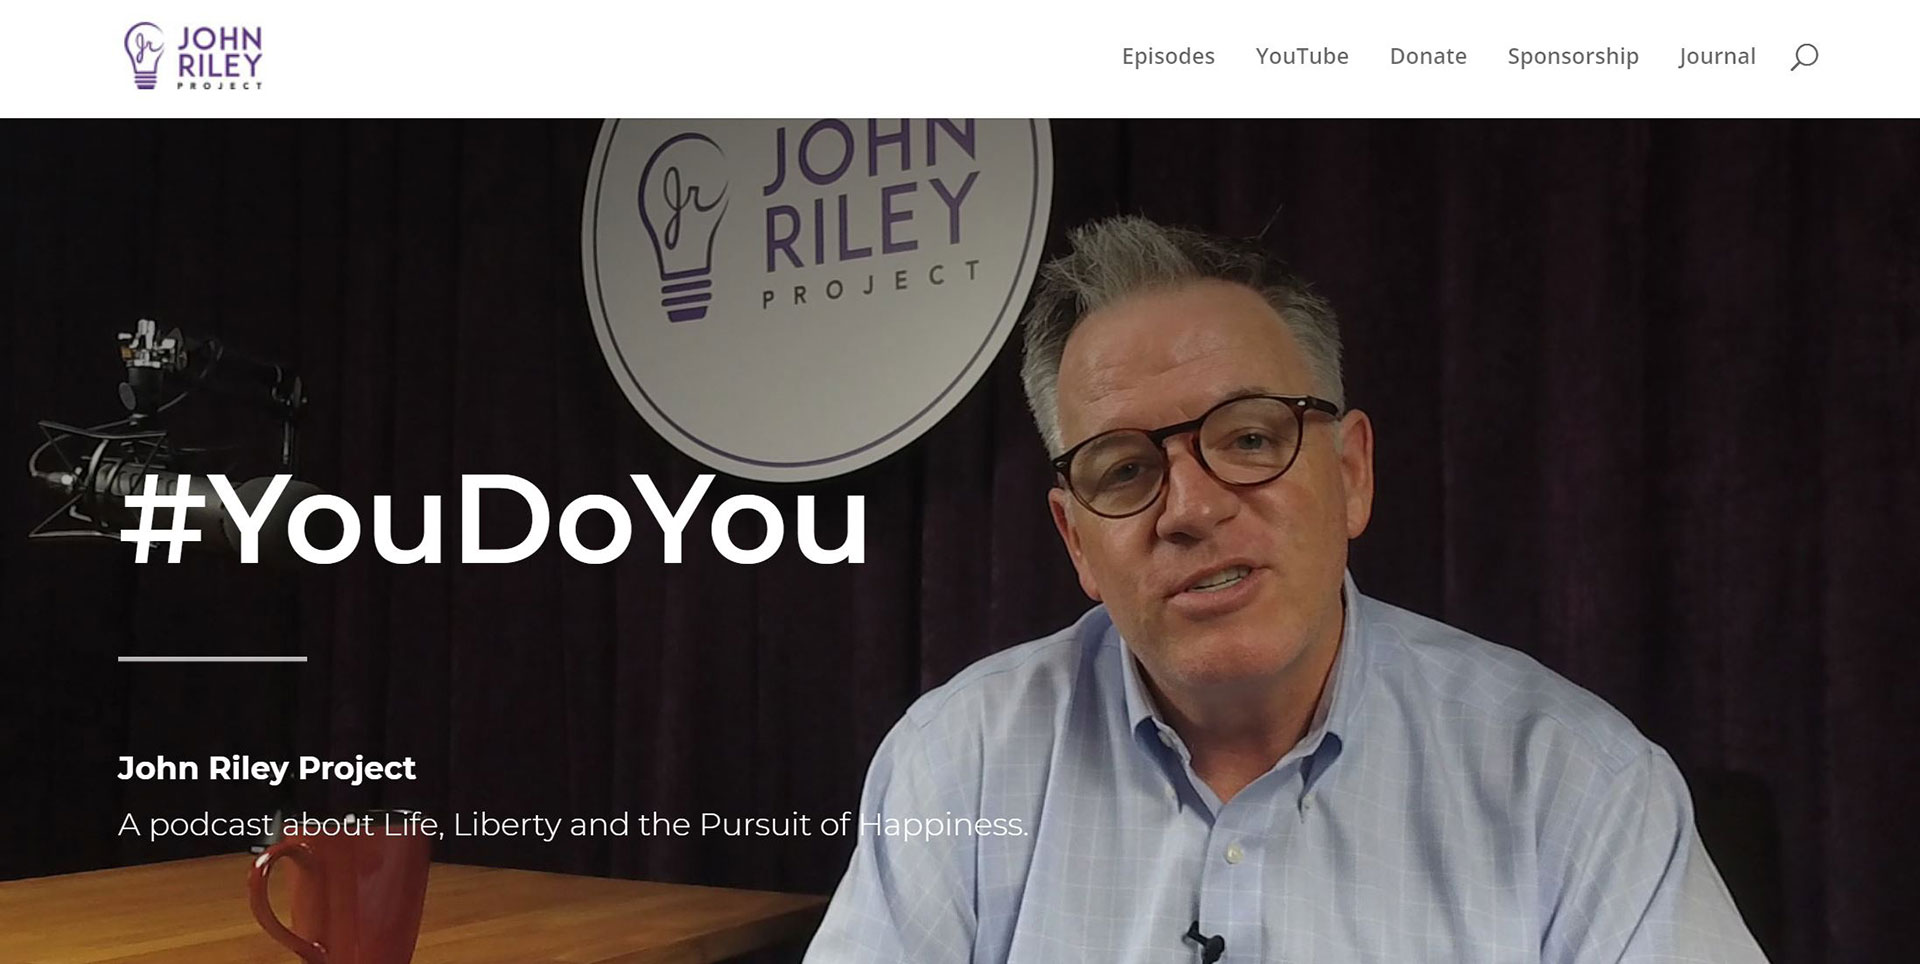 John Riley Project website front page